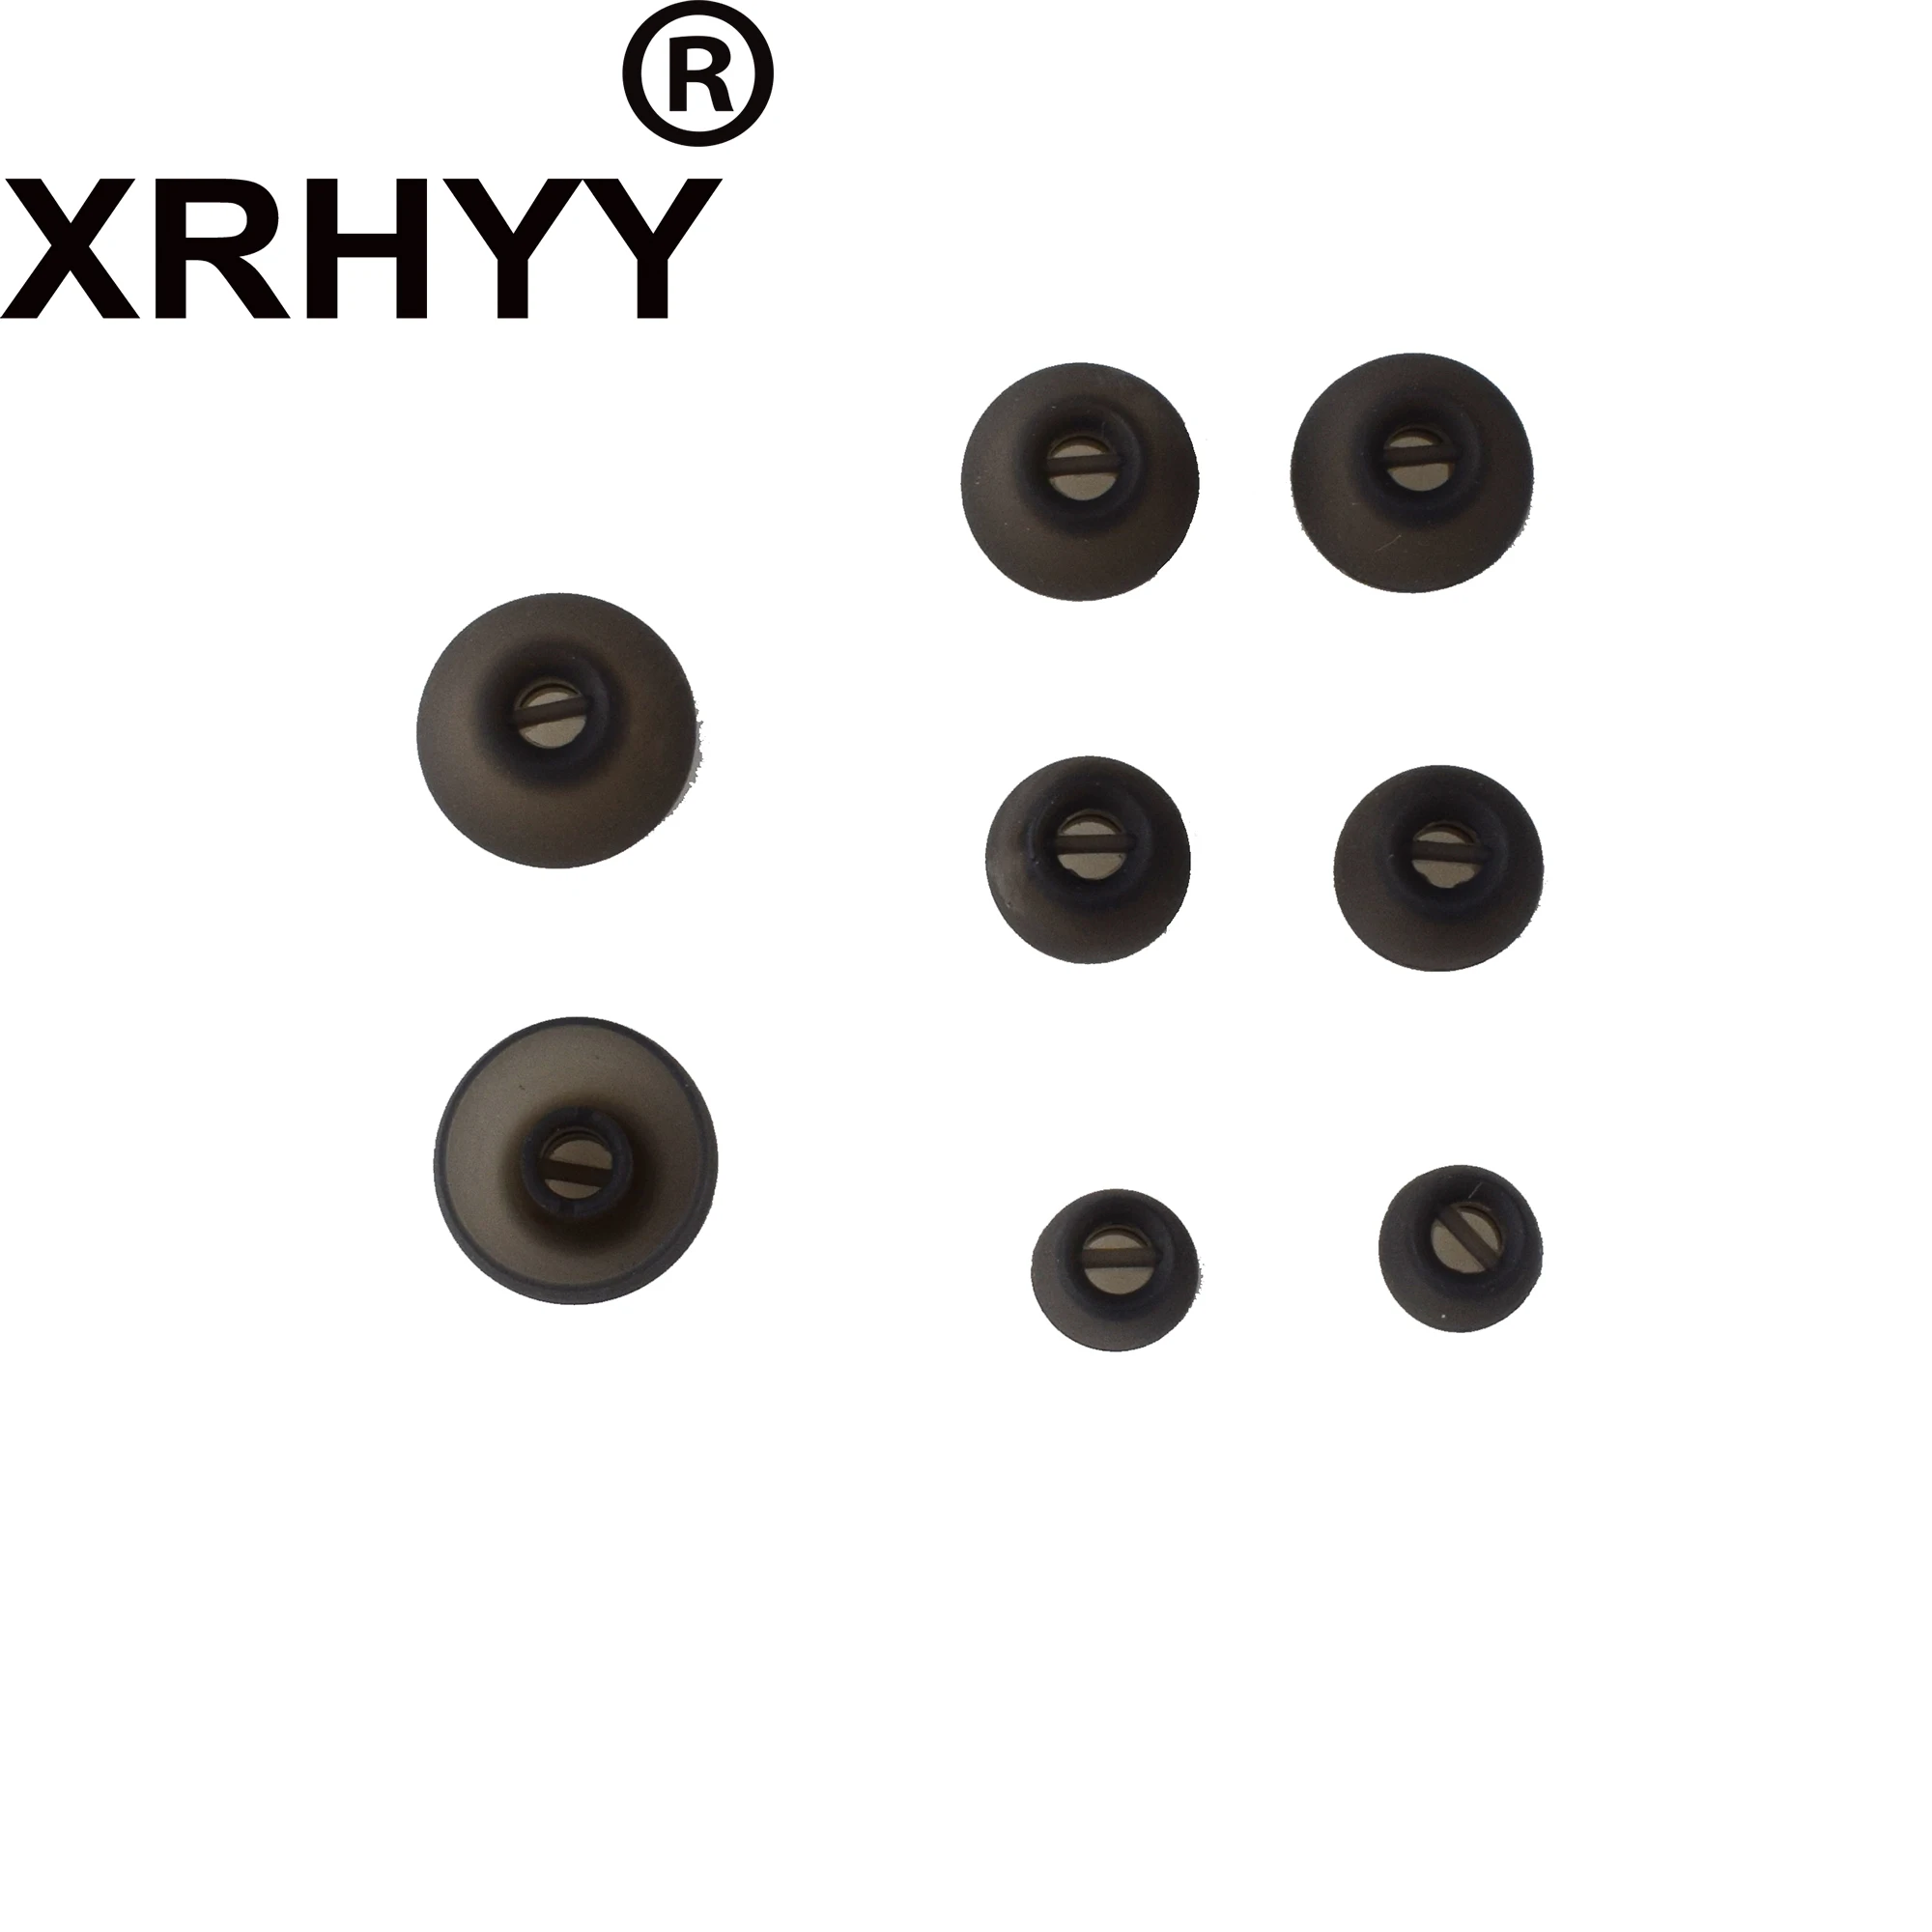 XRHYY 8 Pair Gray XS/S/M/L Soft Silicone Replacement Ear Tip Ear Adapters For Sennheiser Momentum HD1 In-Ear Earbud Ear Adapters